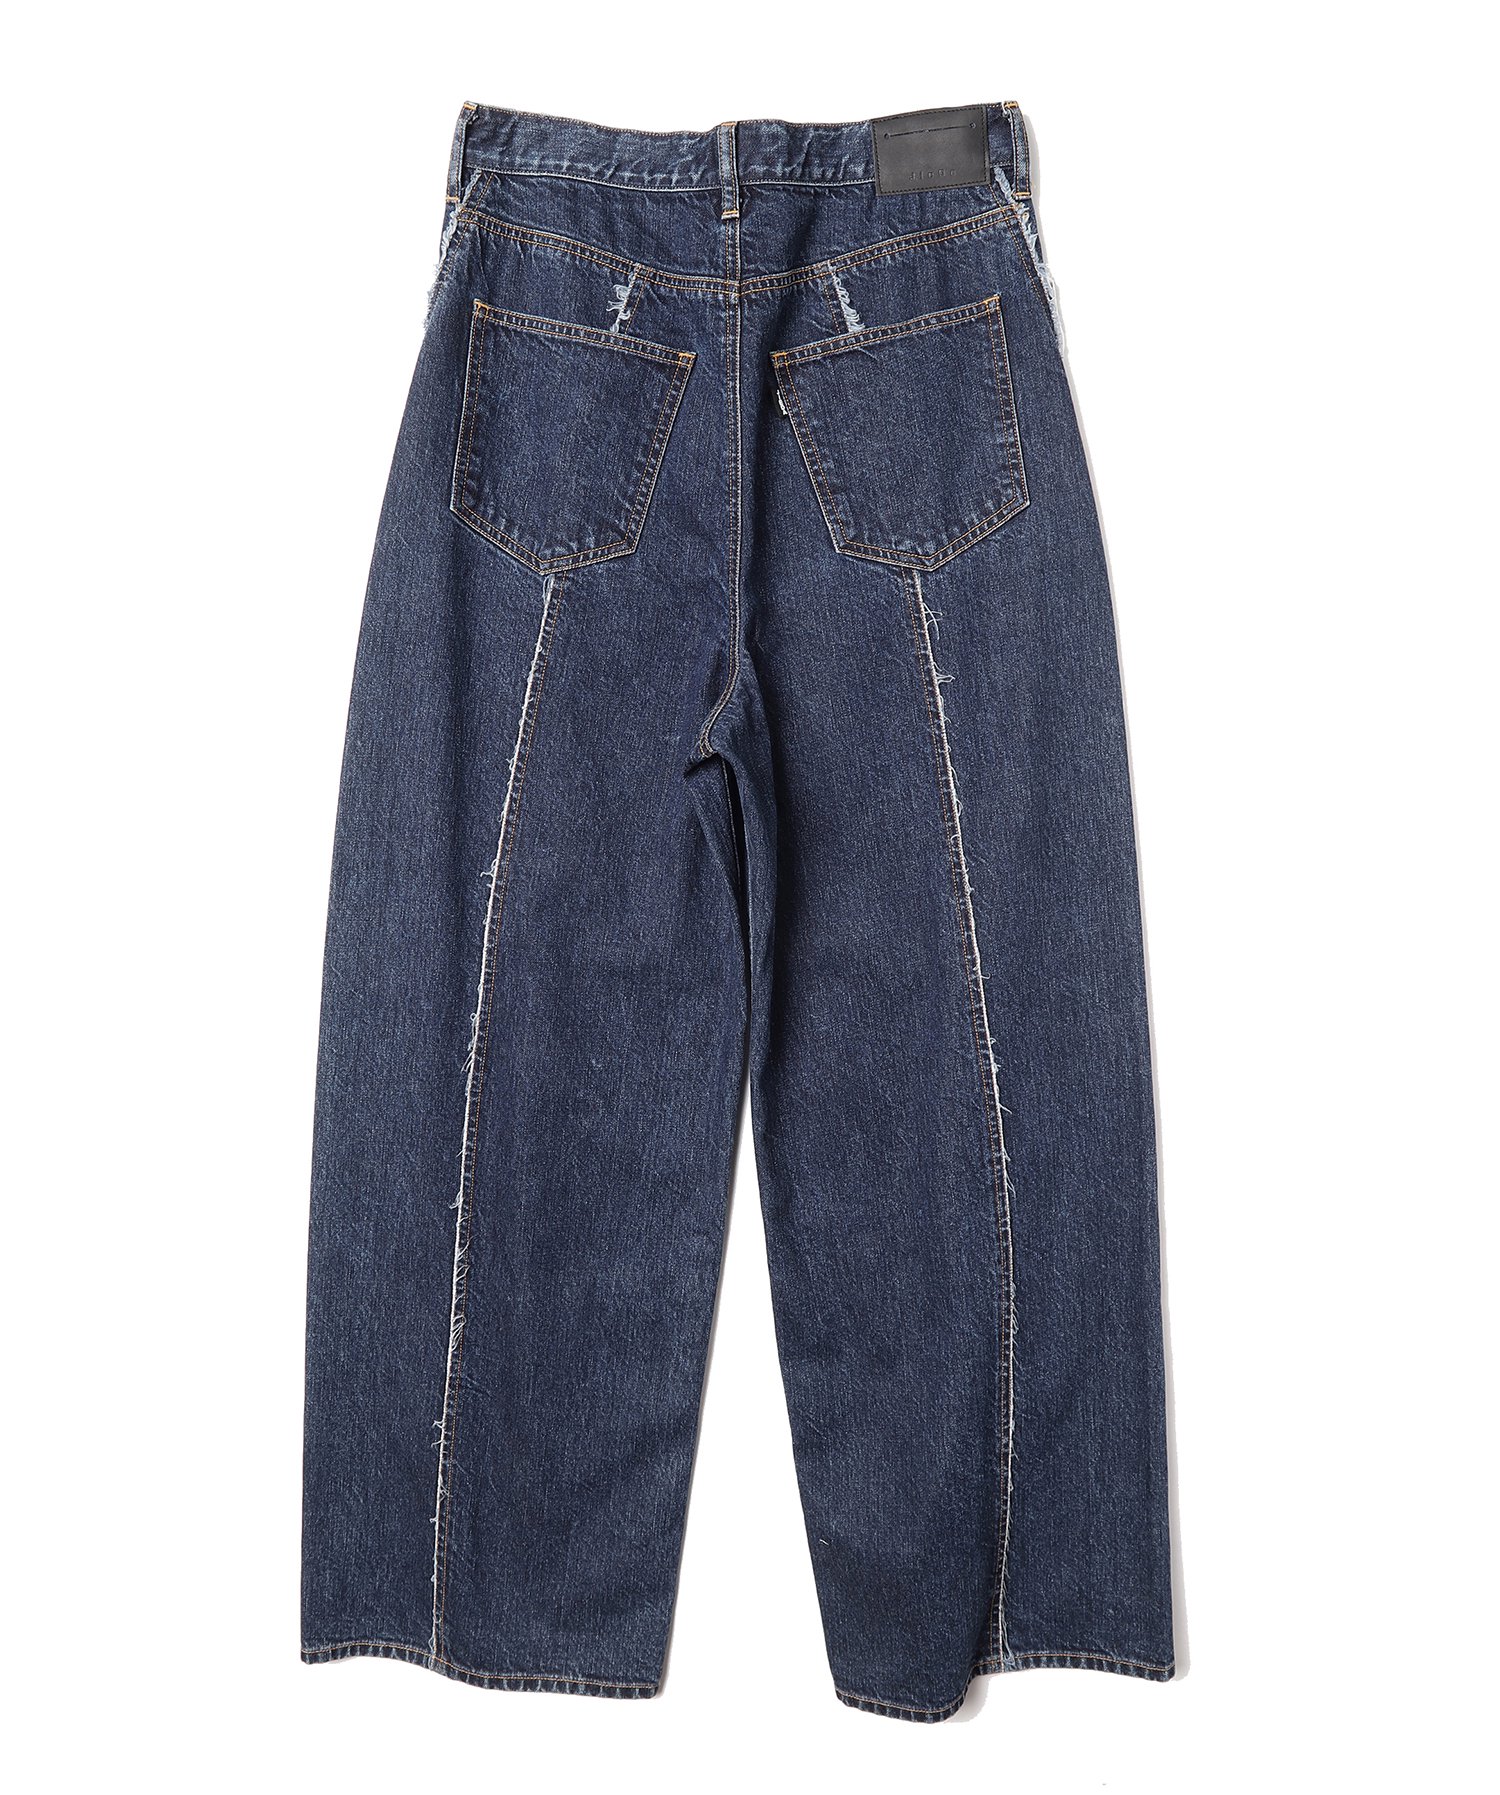 JieDa<br />LOOSE FIT JEANS / INDIGO<img class='new_mark_img2' src='https://img.shop-pro.jp/img/new/icons14.gif' style='border:none;display:inline;margin:0px;padding:0px;width:auto;' />